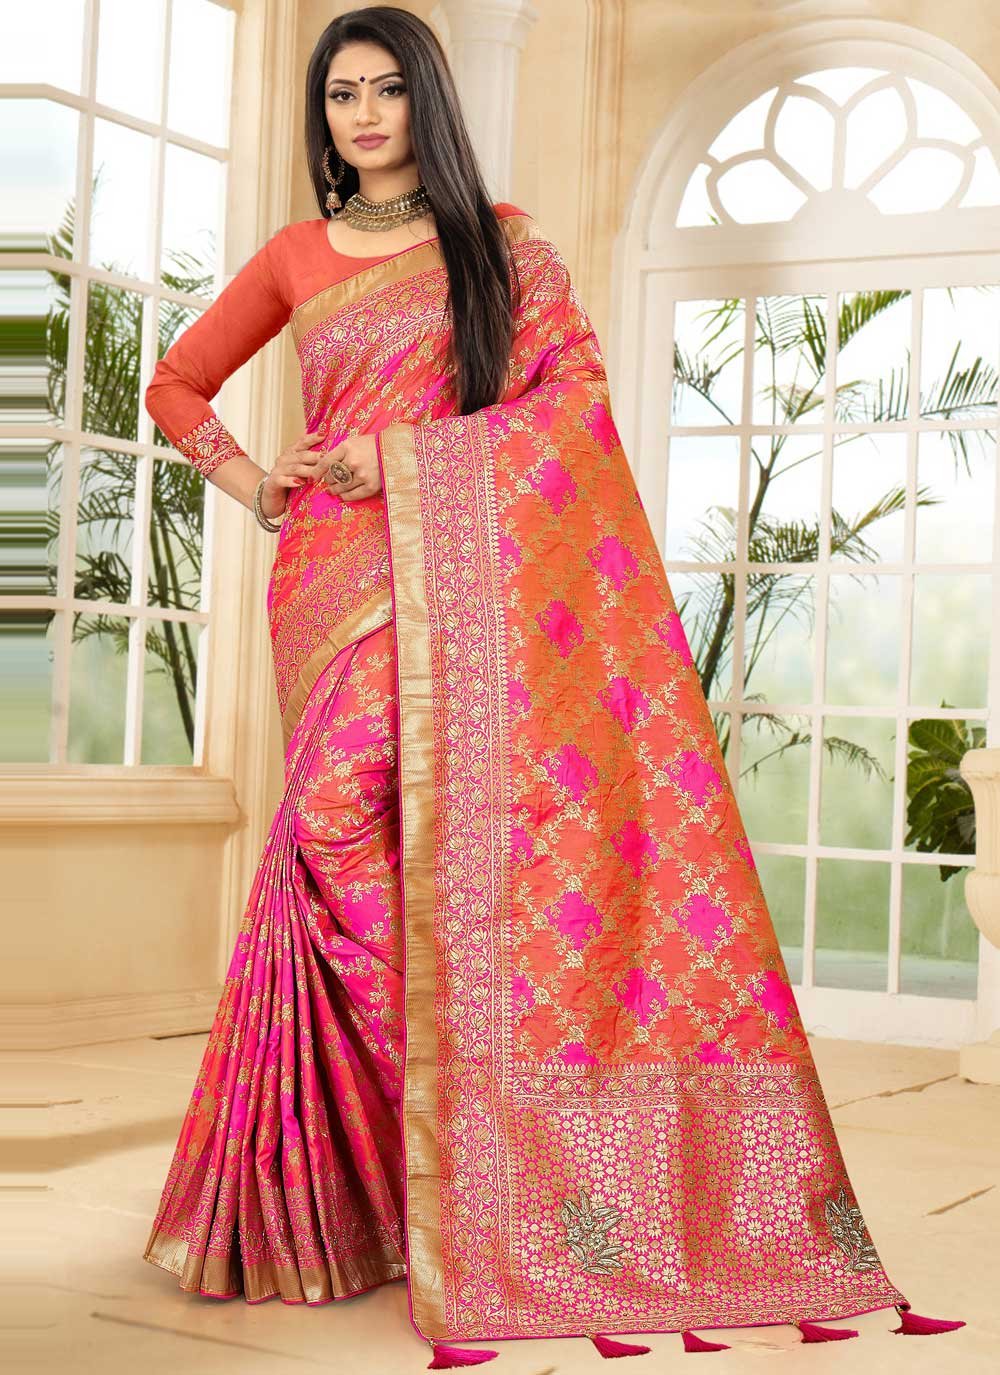 Buy New fancy Banarasi saree Online In India At Discounted Prices